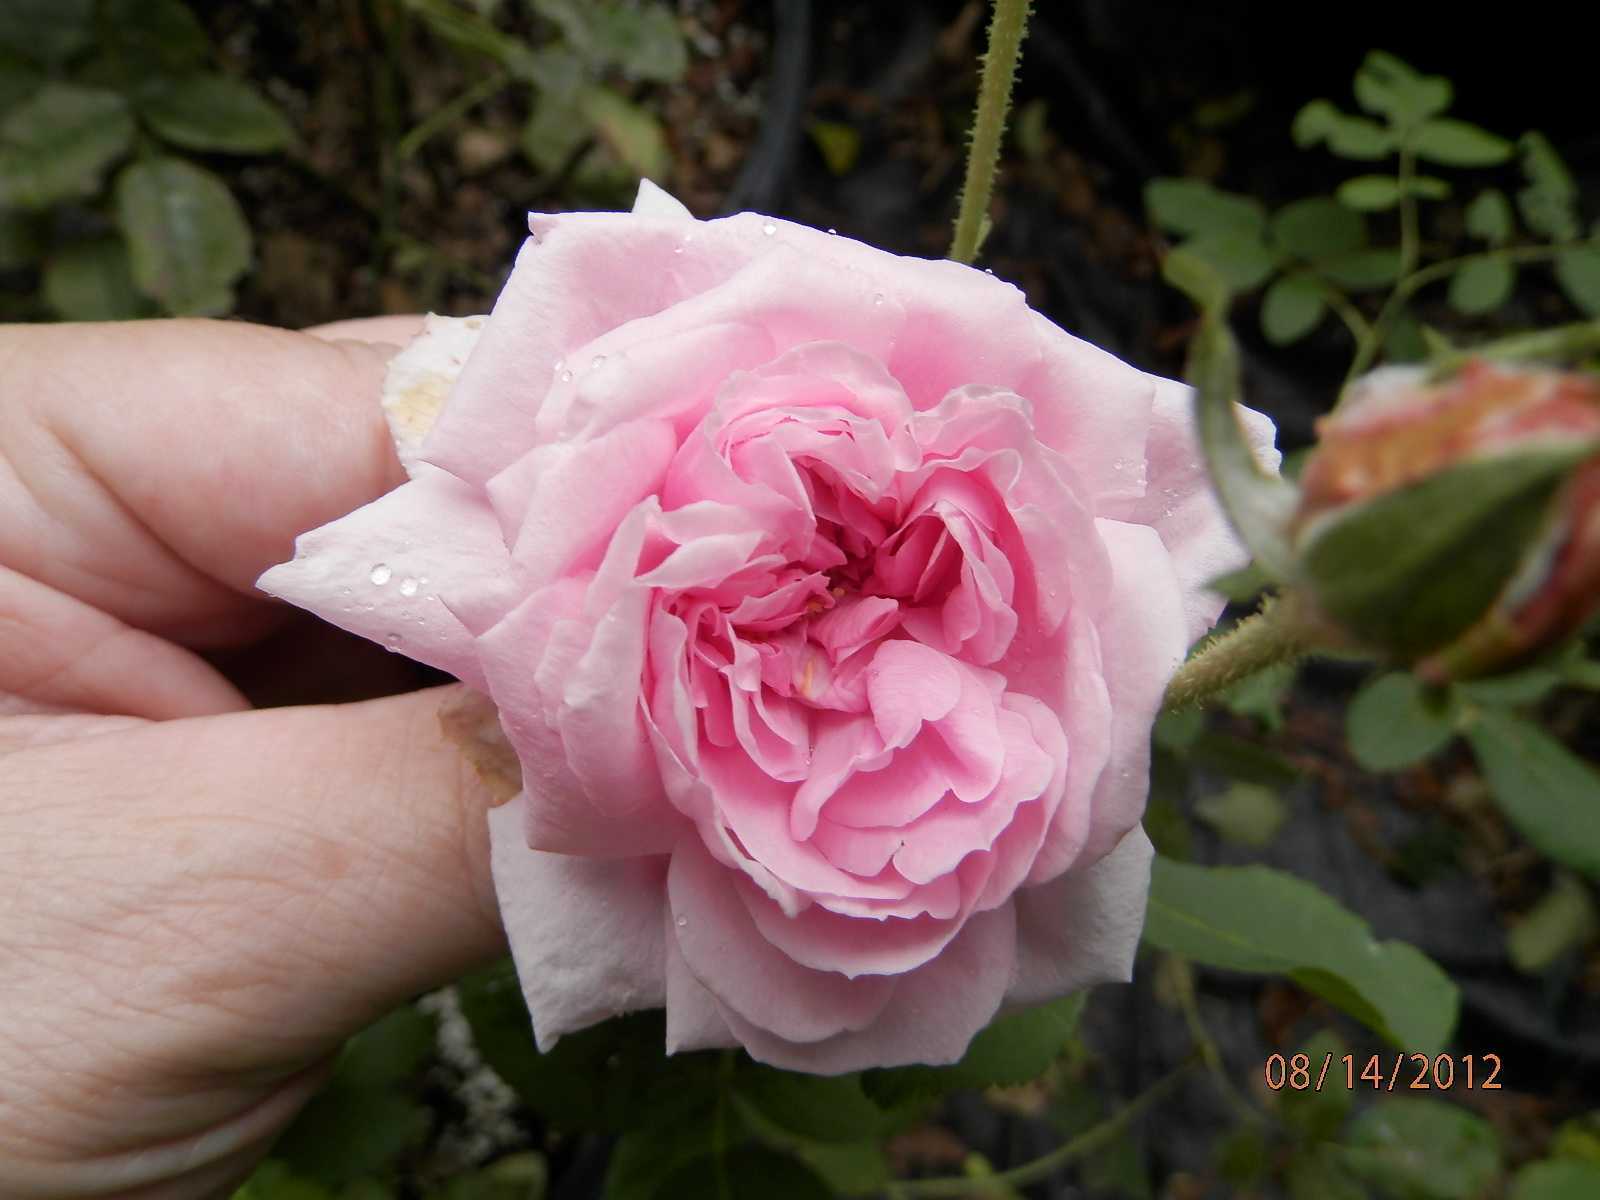 Crop 164 Comte De Chambord Portland Rose Zone 5 For Sure 4 Ft X 3 Ft Pink Flowers Up To 4 Inches Across Fragrance Fff Introduced Around 1860